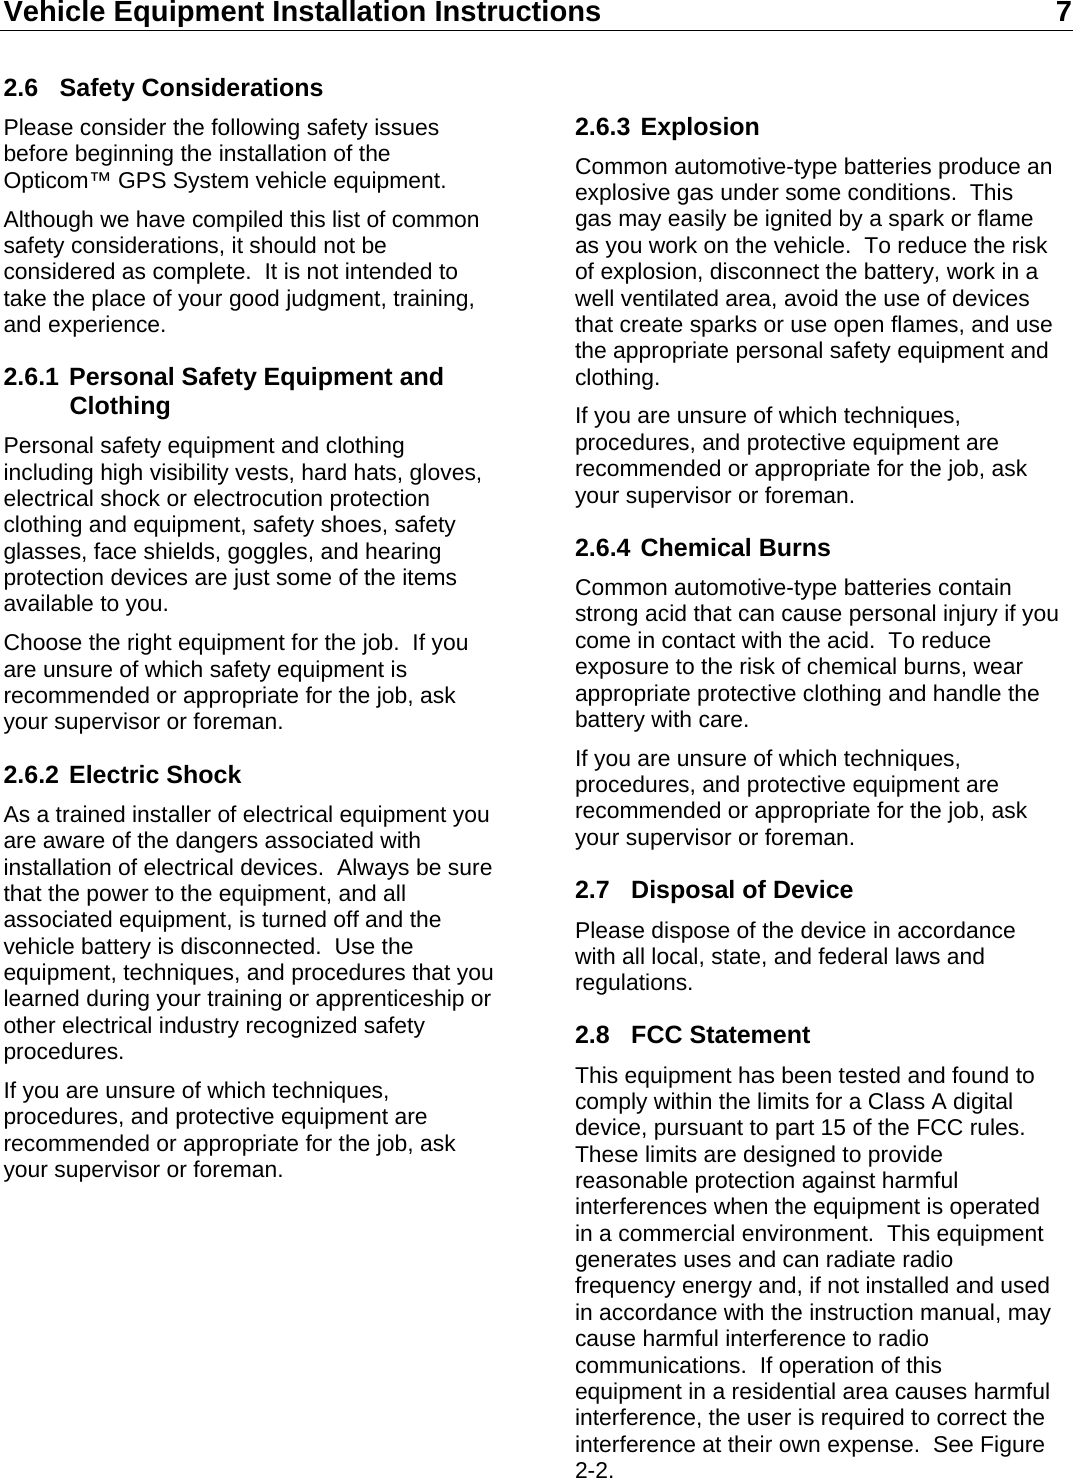 Vehicle Equipment Installation Instructions 7  2.6 Safety Considerations Please consider the following safety issues before beginning the installation of the Opticom™ GPS System vehicle equipment. Although we have compiled this list of common safety considerations, it should not be considered as complete.  It is not intended to take the place of your good judgment, training, and experience. 2.6.1 Personal Safety Equipment and Clothing Personal safety equipment and clothing including high visibility vests, hard hats, gloves, electrical shock or electrocution protection clothing and equipment, safety shoes, safety glasses, face shields, goggles, and hearing protection devices are just some of the items available to you. Choose the right equipment for the job.  If you are unsure of which safety equipment is recommended or appropriate for the job, ask your supervisor or foreman. 2.6.2 Electric Shock As a trained installer of electrical equipment you are aware of the dangers associated with installation of electrical devices.  Always be sure that the power to the equipment, and all associated equipment, is turned off and the vehicle battery is disconnected.  Use the equipment, techniques, and procedures that you learned during your training or apprenticeship or other electrical industry recognized safety procedures. If you are unsure of which techniques, procedures, and protective equipment are recommended or appropriate for the job, ask your supervisor or foreman.          2.6.3 Explosion Common automotive-type batteries produce an explosive gas under some conditions.  This gas may easily be ignited by a spark or flame as you work on the vehicle.  To reduce the risk of explosion, disconnect the battery, work in a well ventilated area, avoid the use of devices that create sparks or use open flames, and use the appropriate personal safety equipment and clothing. If you are unsure of which techniques, procedures, and protective equipment are recommended or appropriate for the job, ask your supervisor or foreman. 2.6.4 Chemical Burns Common automotive-type batteries contain strong acid that can cause personal injury if you come in contact with the acid.  To reduce exposure to the risk of chemical burns, wear appropriate protective clothing and handle the battery with care. If you are unsure of which techniques, procedures, and protective equipment are recommended or appropriate for the job, ask your supervisor or foreman. 2.7  Disposal of Device Please dispose of the device in accordance with all local, state, and federal laws and regulations. 2.8 FCC Statement This equipment has been tested and found to comply within the limits for a Class A digital device, pursuant to part 15 of the FCC rules.  These limits are designed to provide reasonable protection against harmful interferences when the equipment is operated in a commercial environment.  This equipment generates uses and can radiate radio frequency energy and, if not installed and used in accordance with the instruction manual, may cause harmful interference to radio communications.  If operation of this equipment in a residential area causes harmful interference, the user is required to correct the interference at their own expense.  See Figure 2-2. 